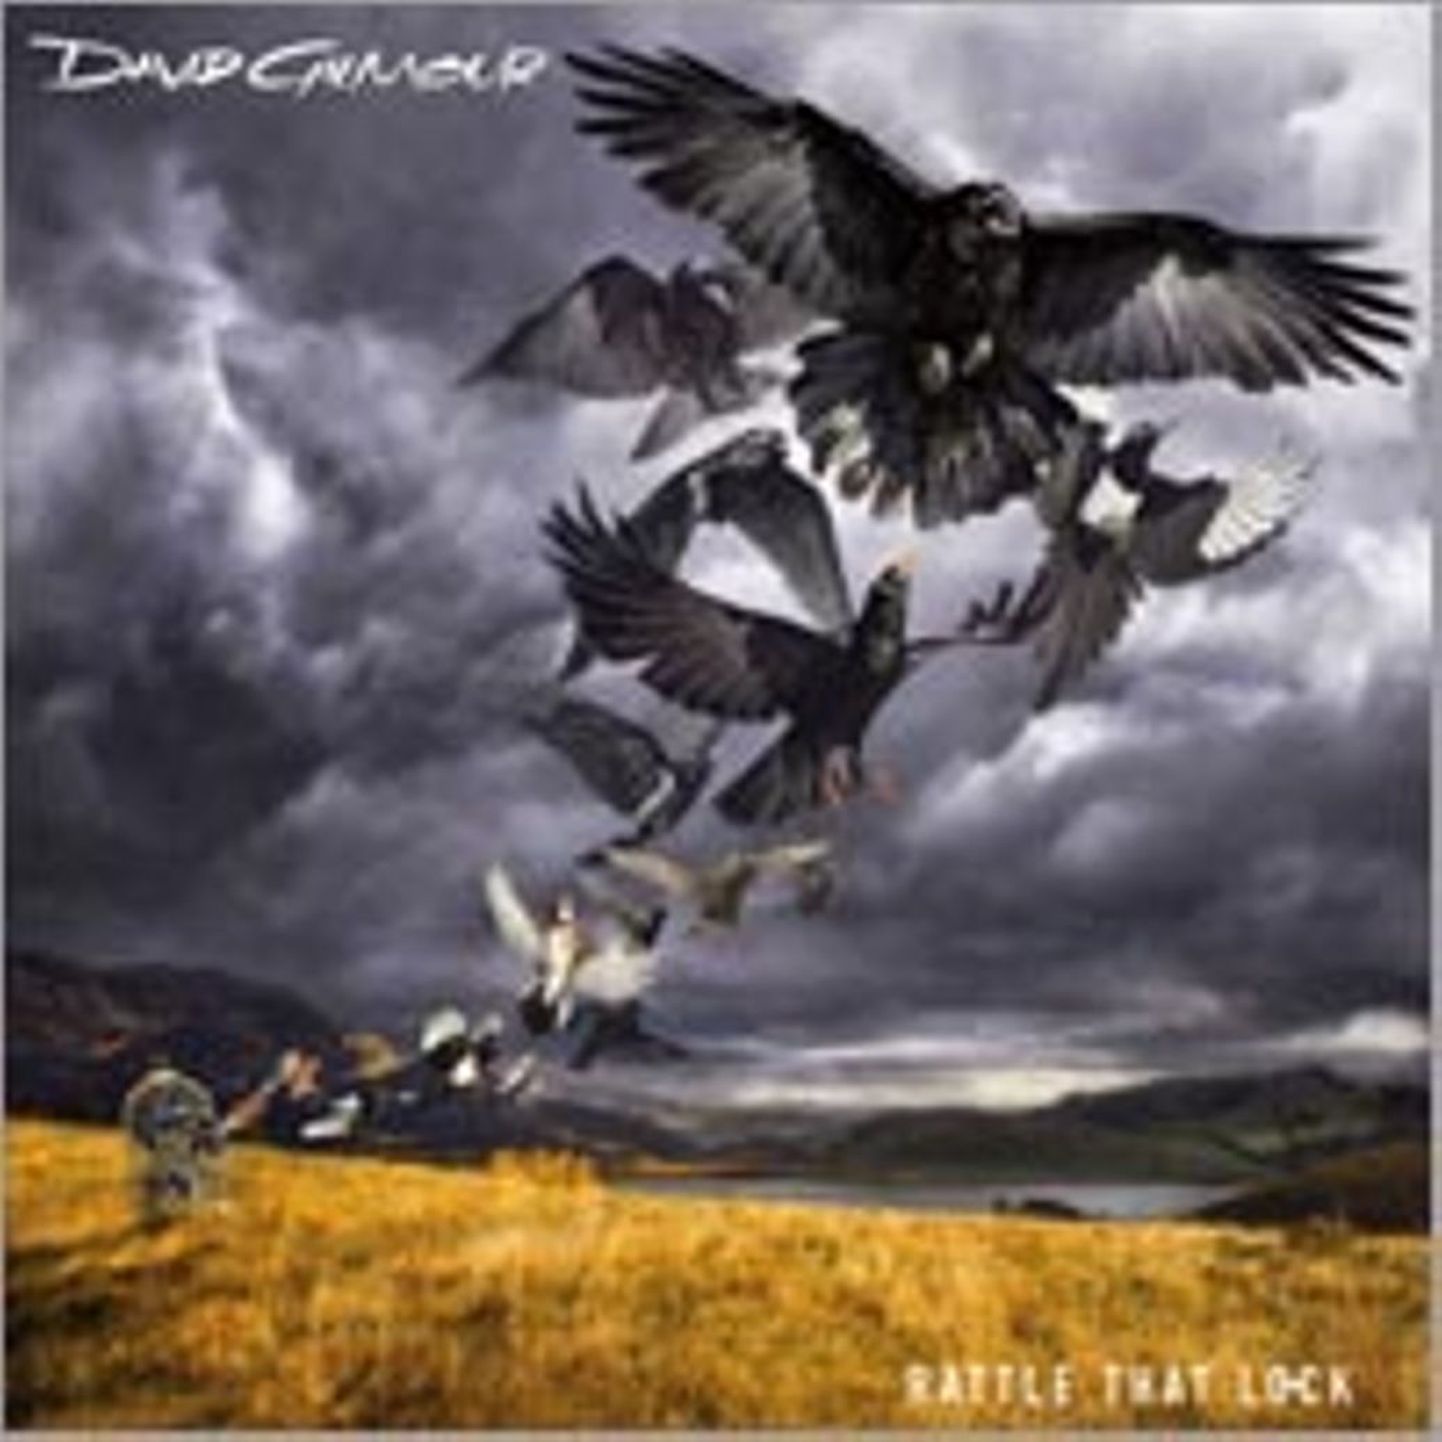 Dave Gilmour- Rattle That Lock